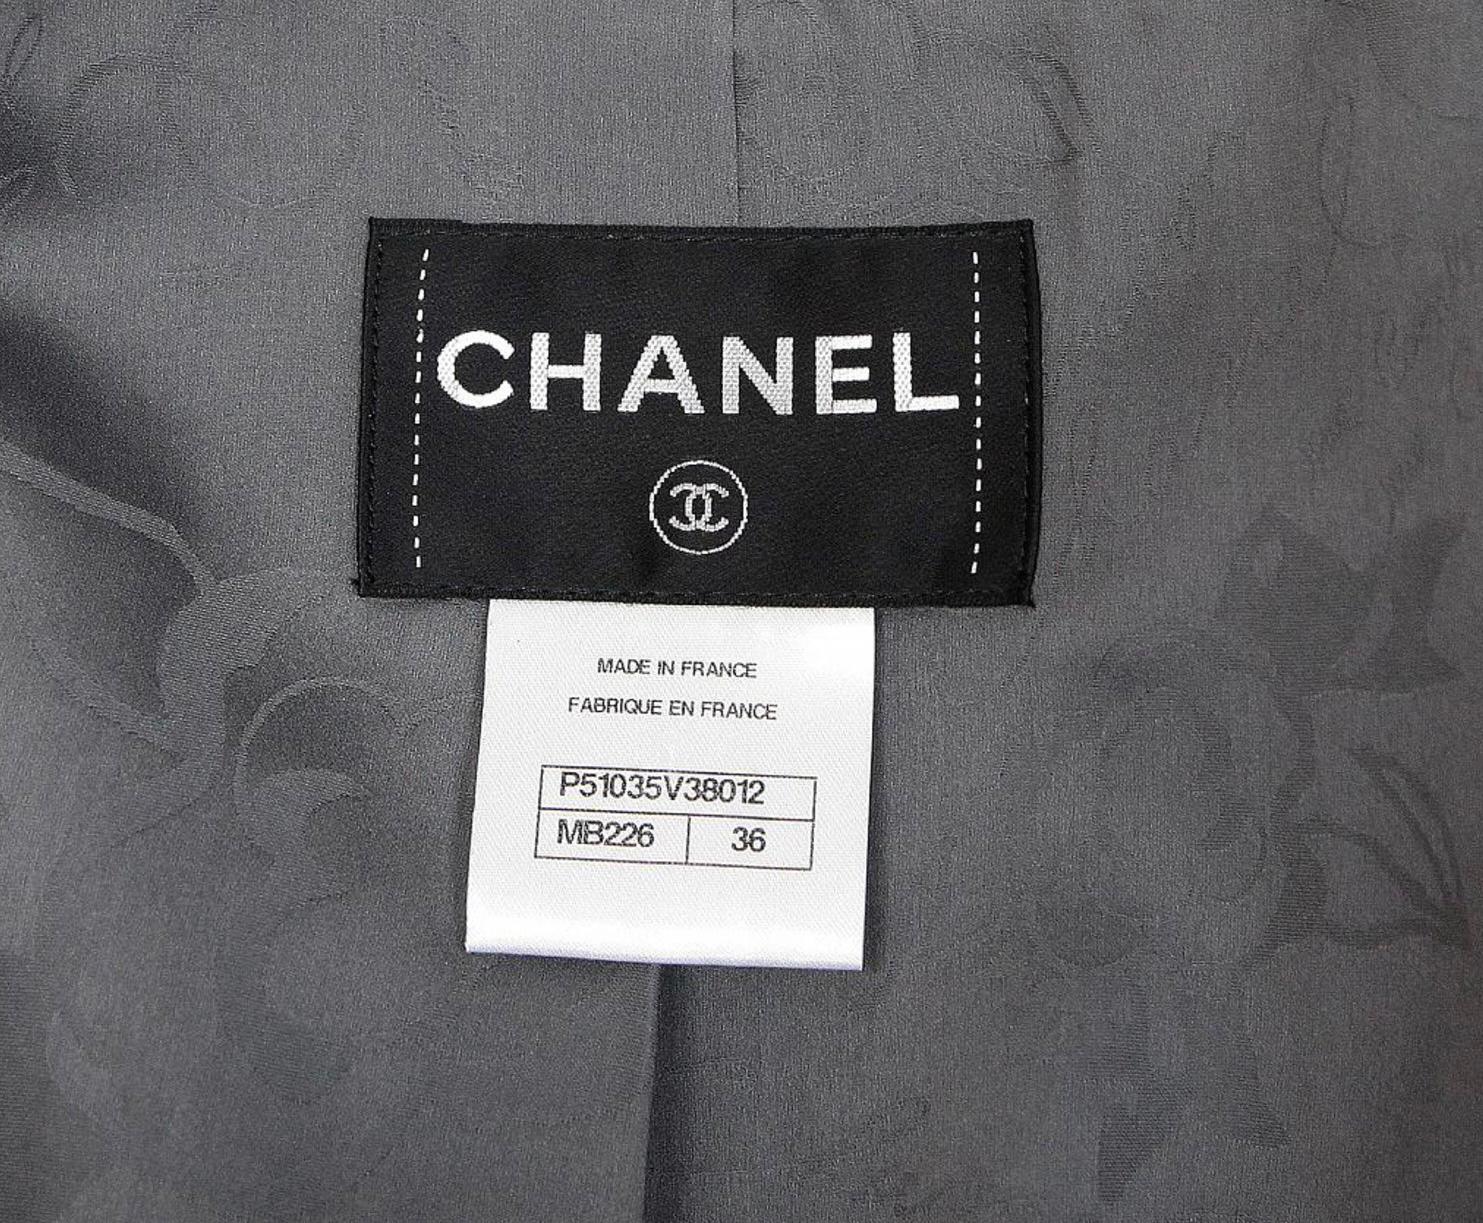 Chanel Lily Allen Style Grey Tweed Jacket For Sale 6